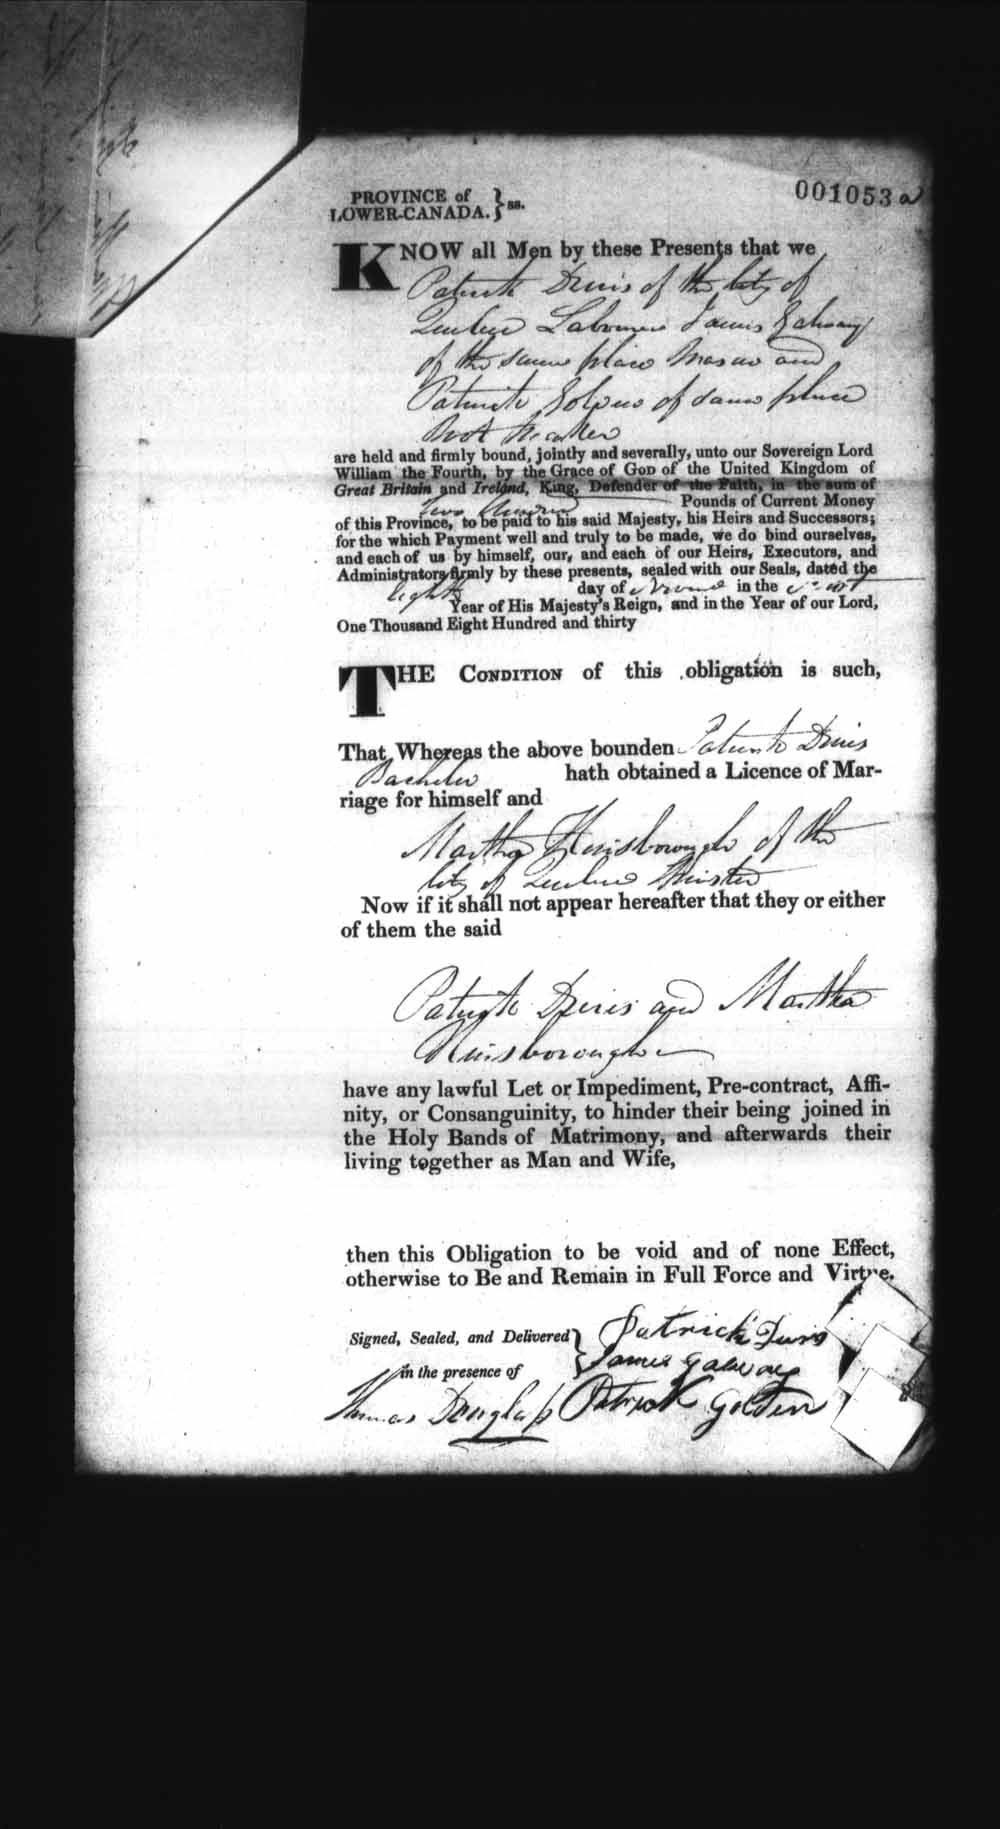 Digitized page of Upper and Lower Canada Marriage Bonds (1779-1865) for Image No.: e008237179